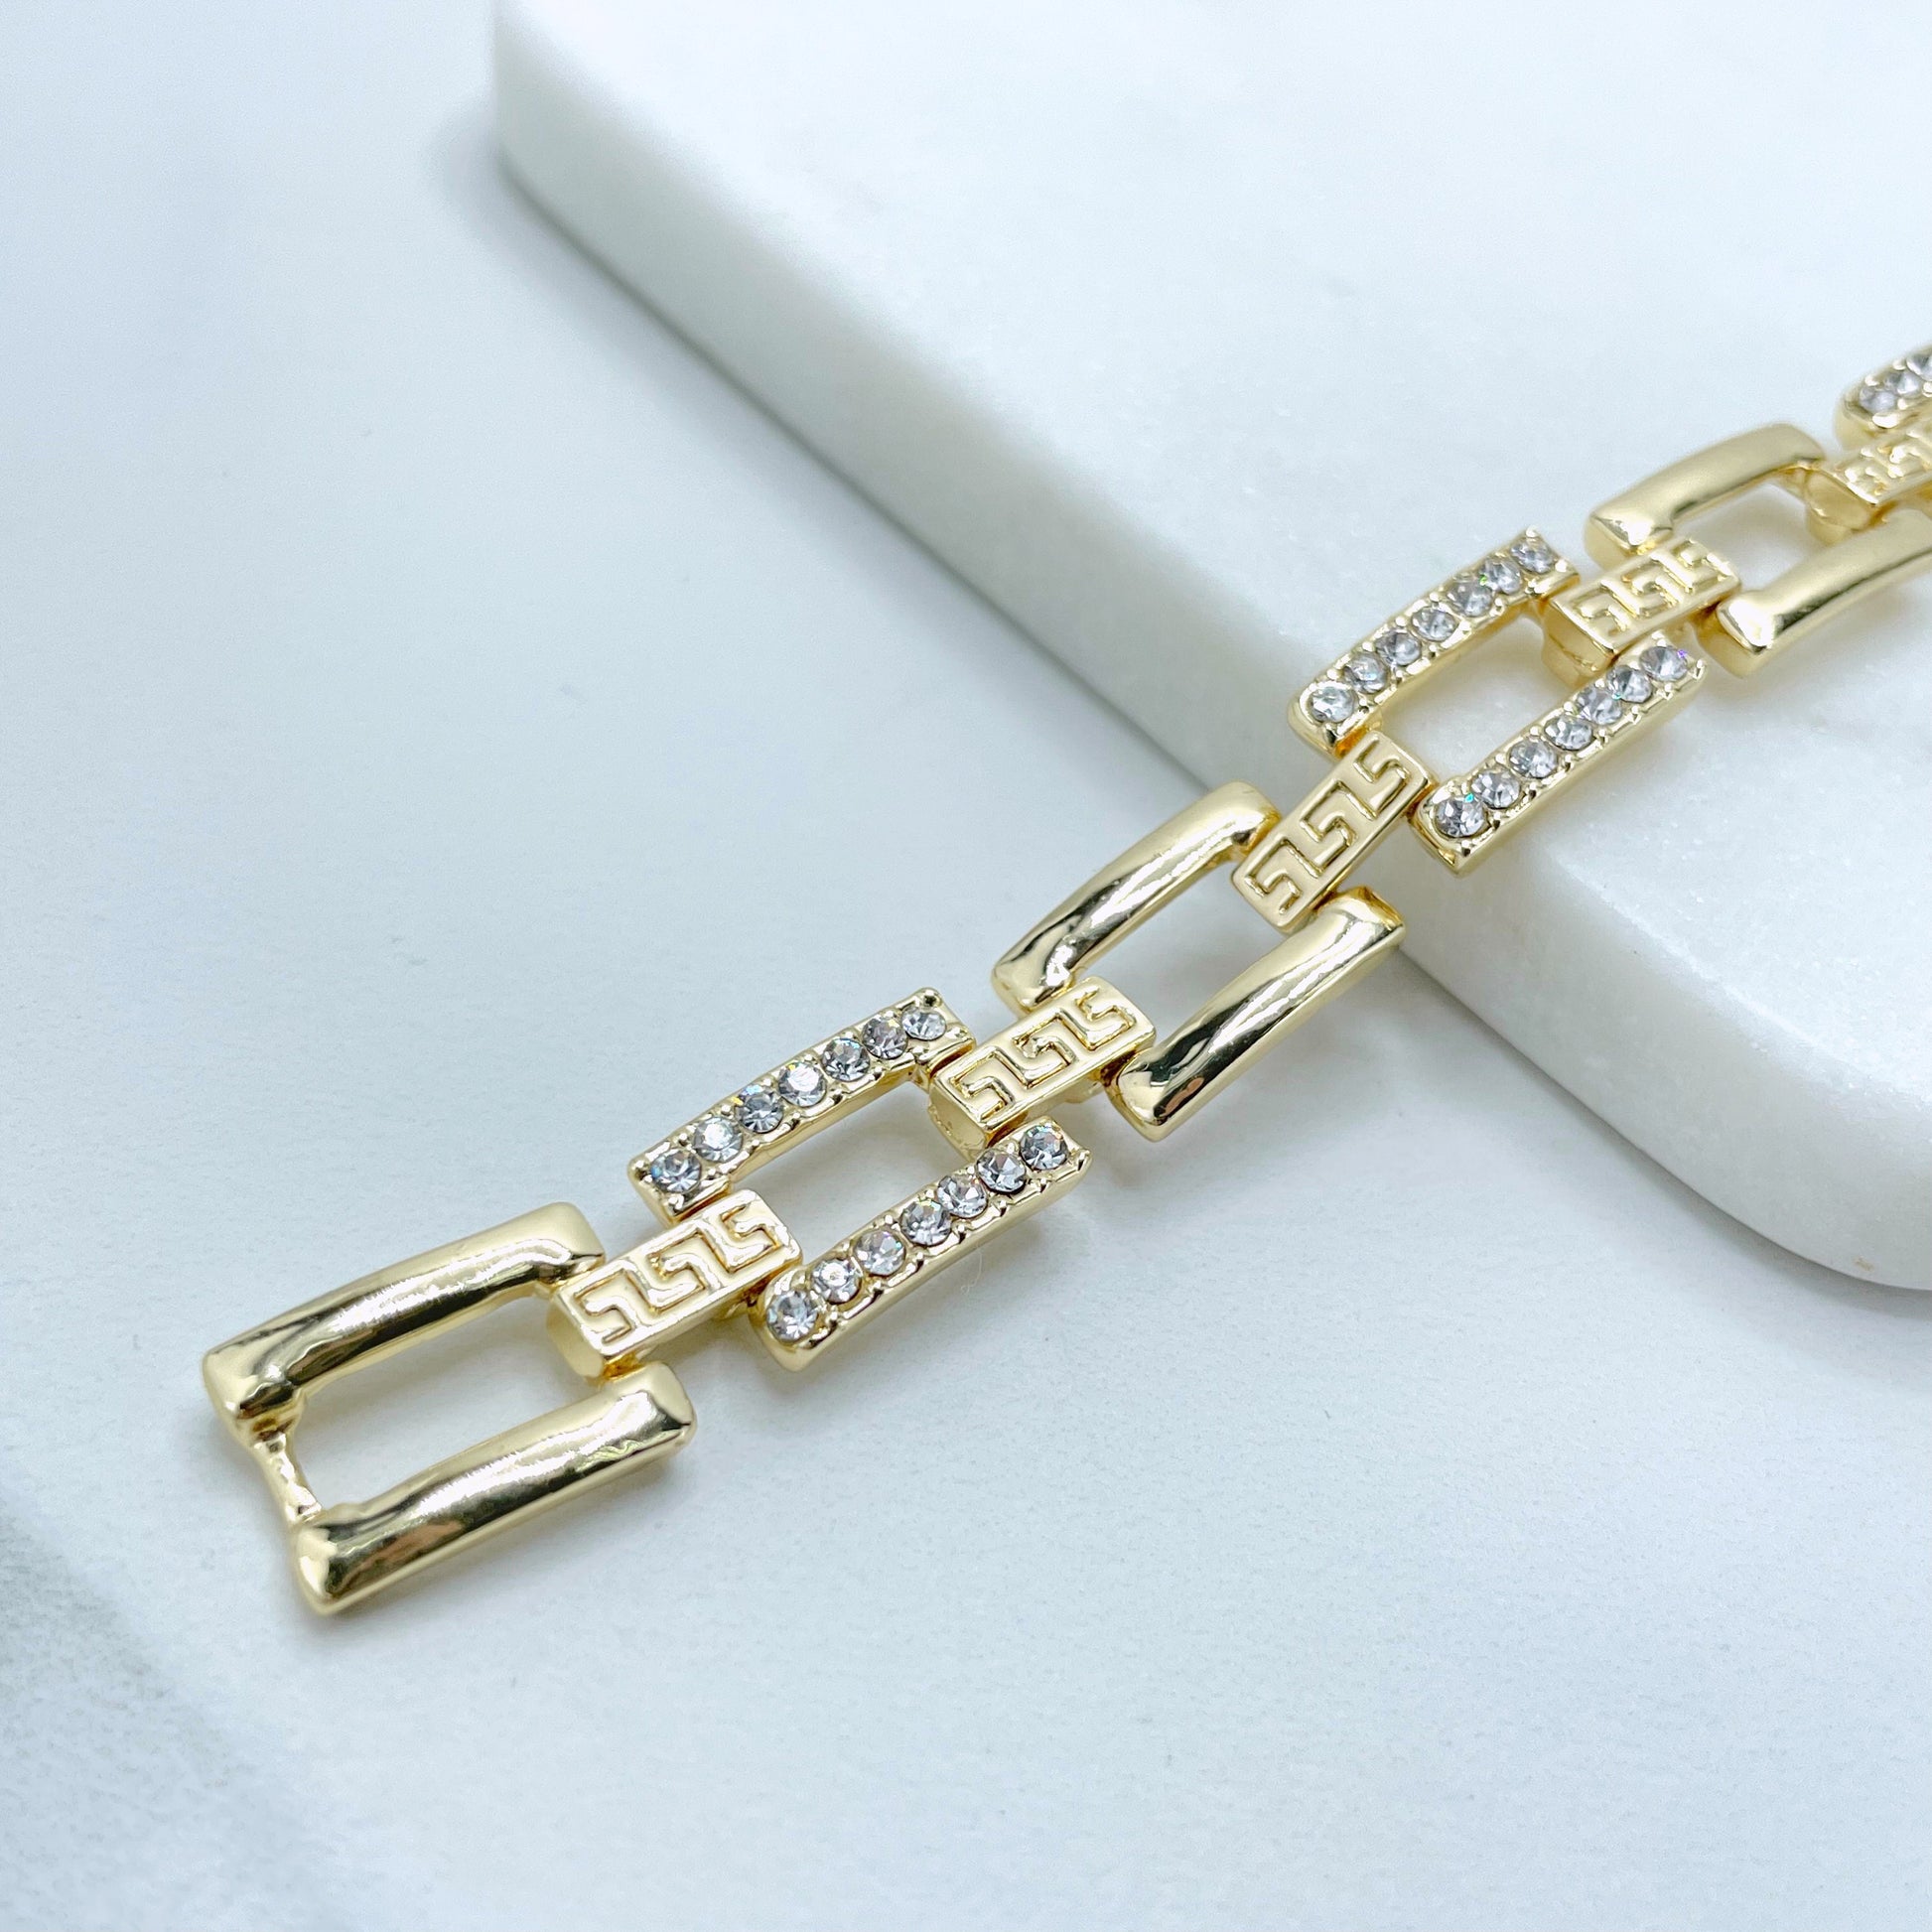 18k Gold Filled with Cubic Zirconia, Rectangular Linked Bracelet with Patterned Details, Wholesale Jewelry Making Supplies